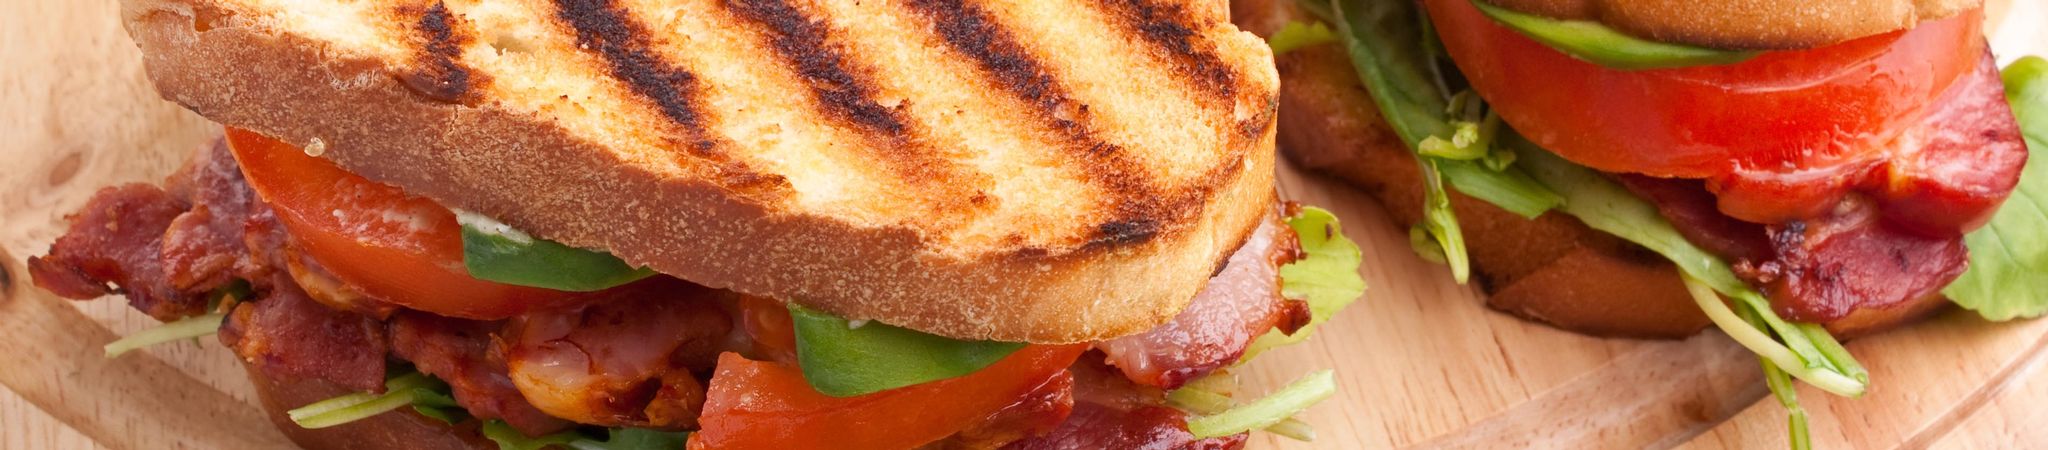 bacon panini with vegetables